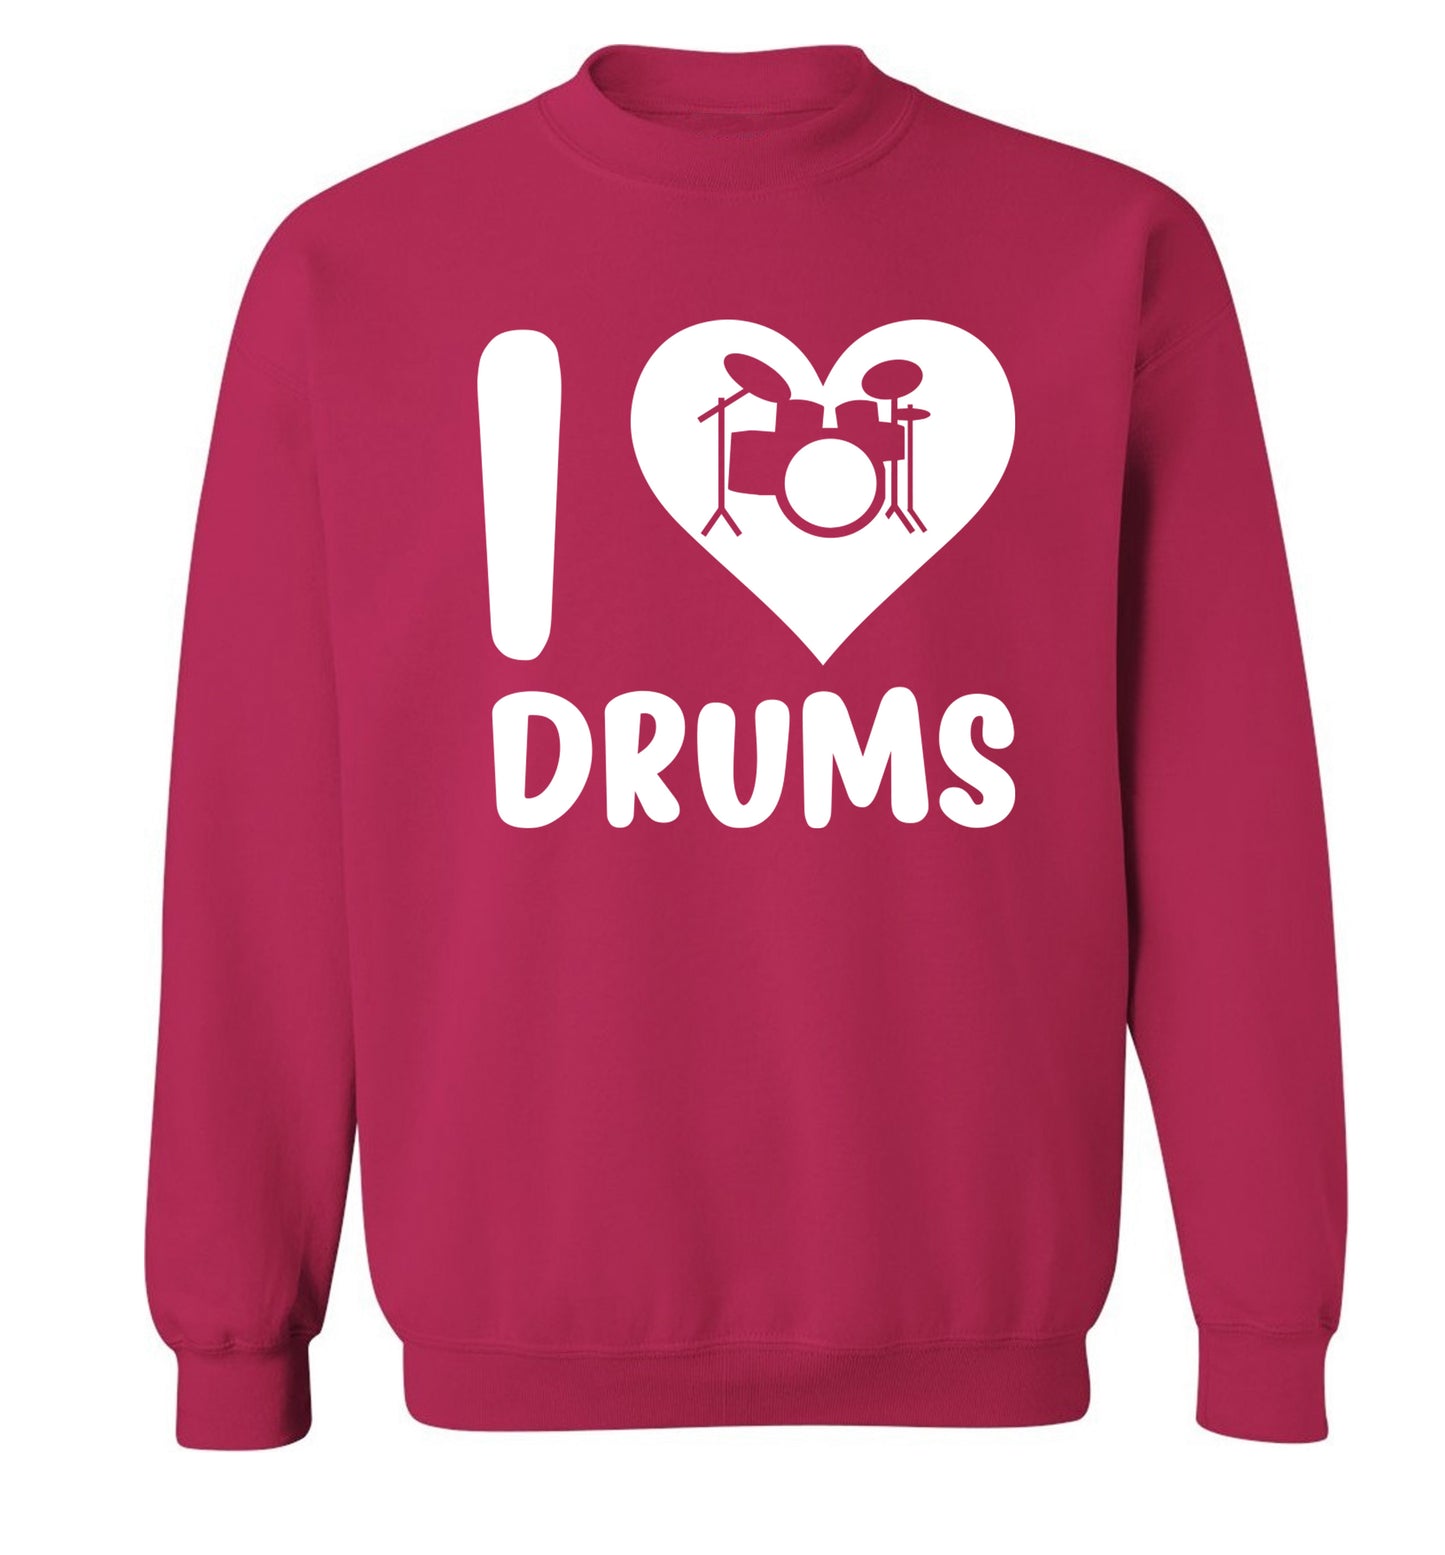 I love drums Adult's unisex pink Sweater 2XL